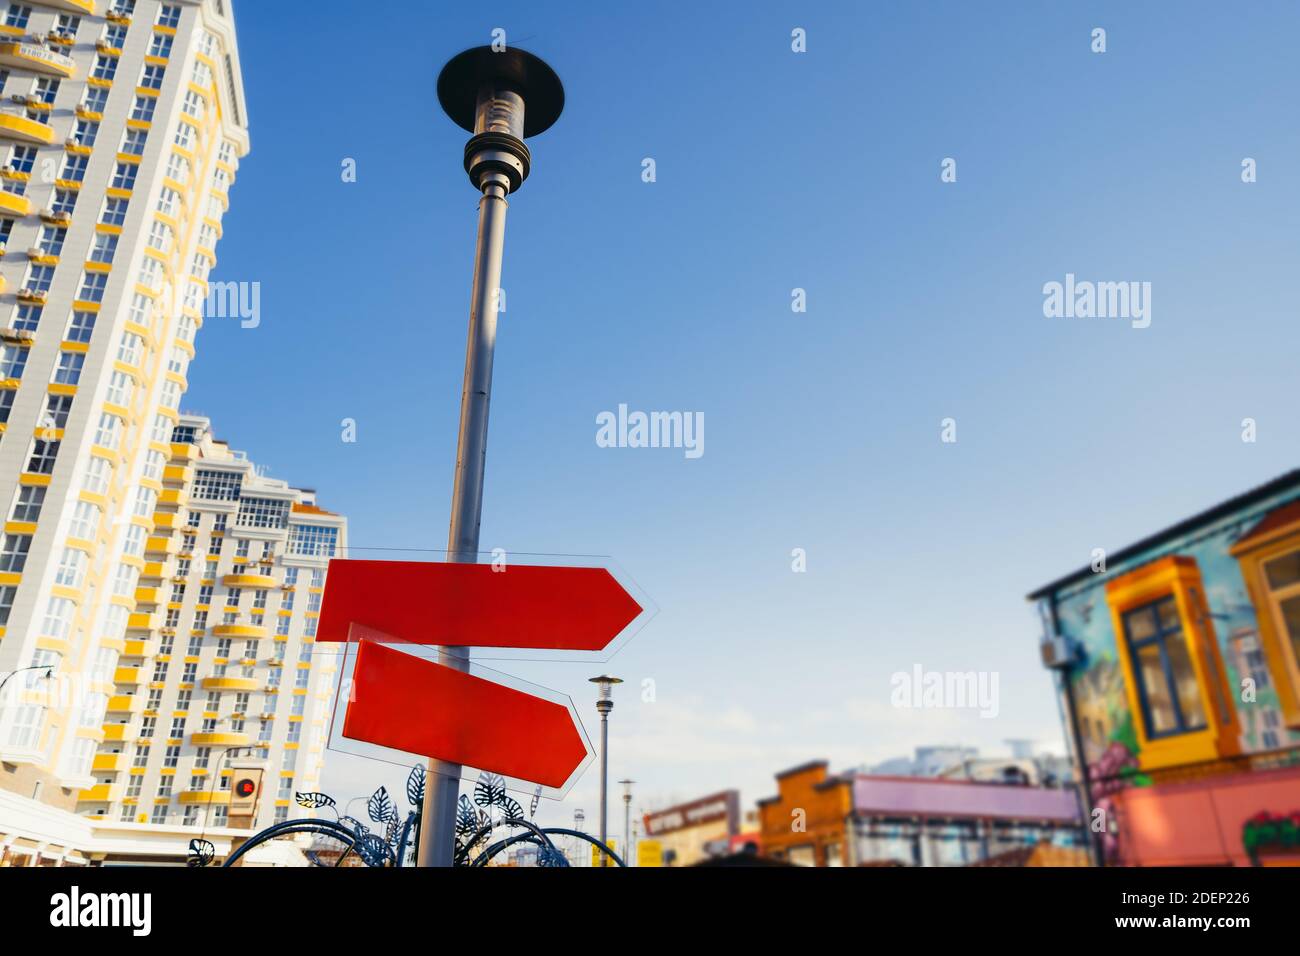 Blank street sign against city. Empty space for text. Road sign, red street sign Stock Photo